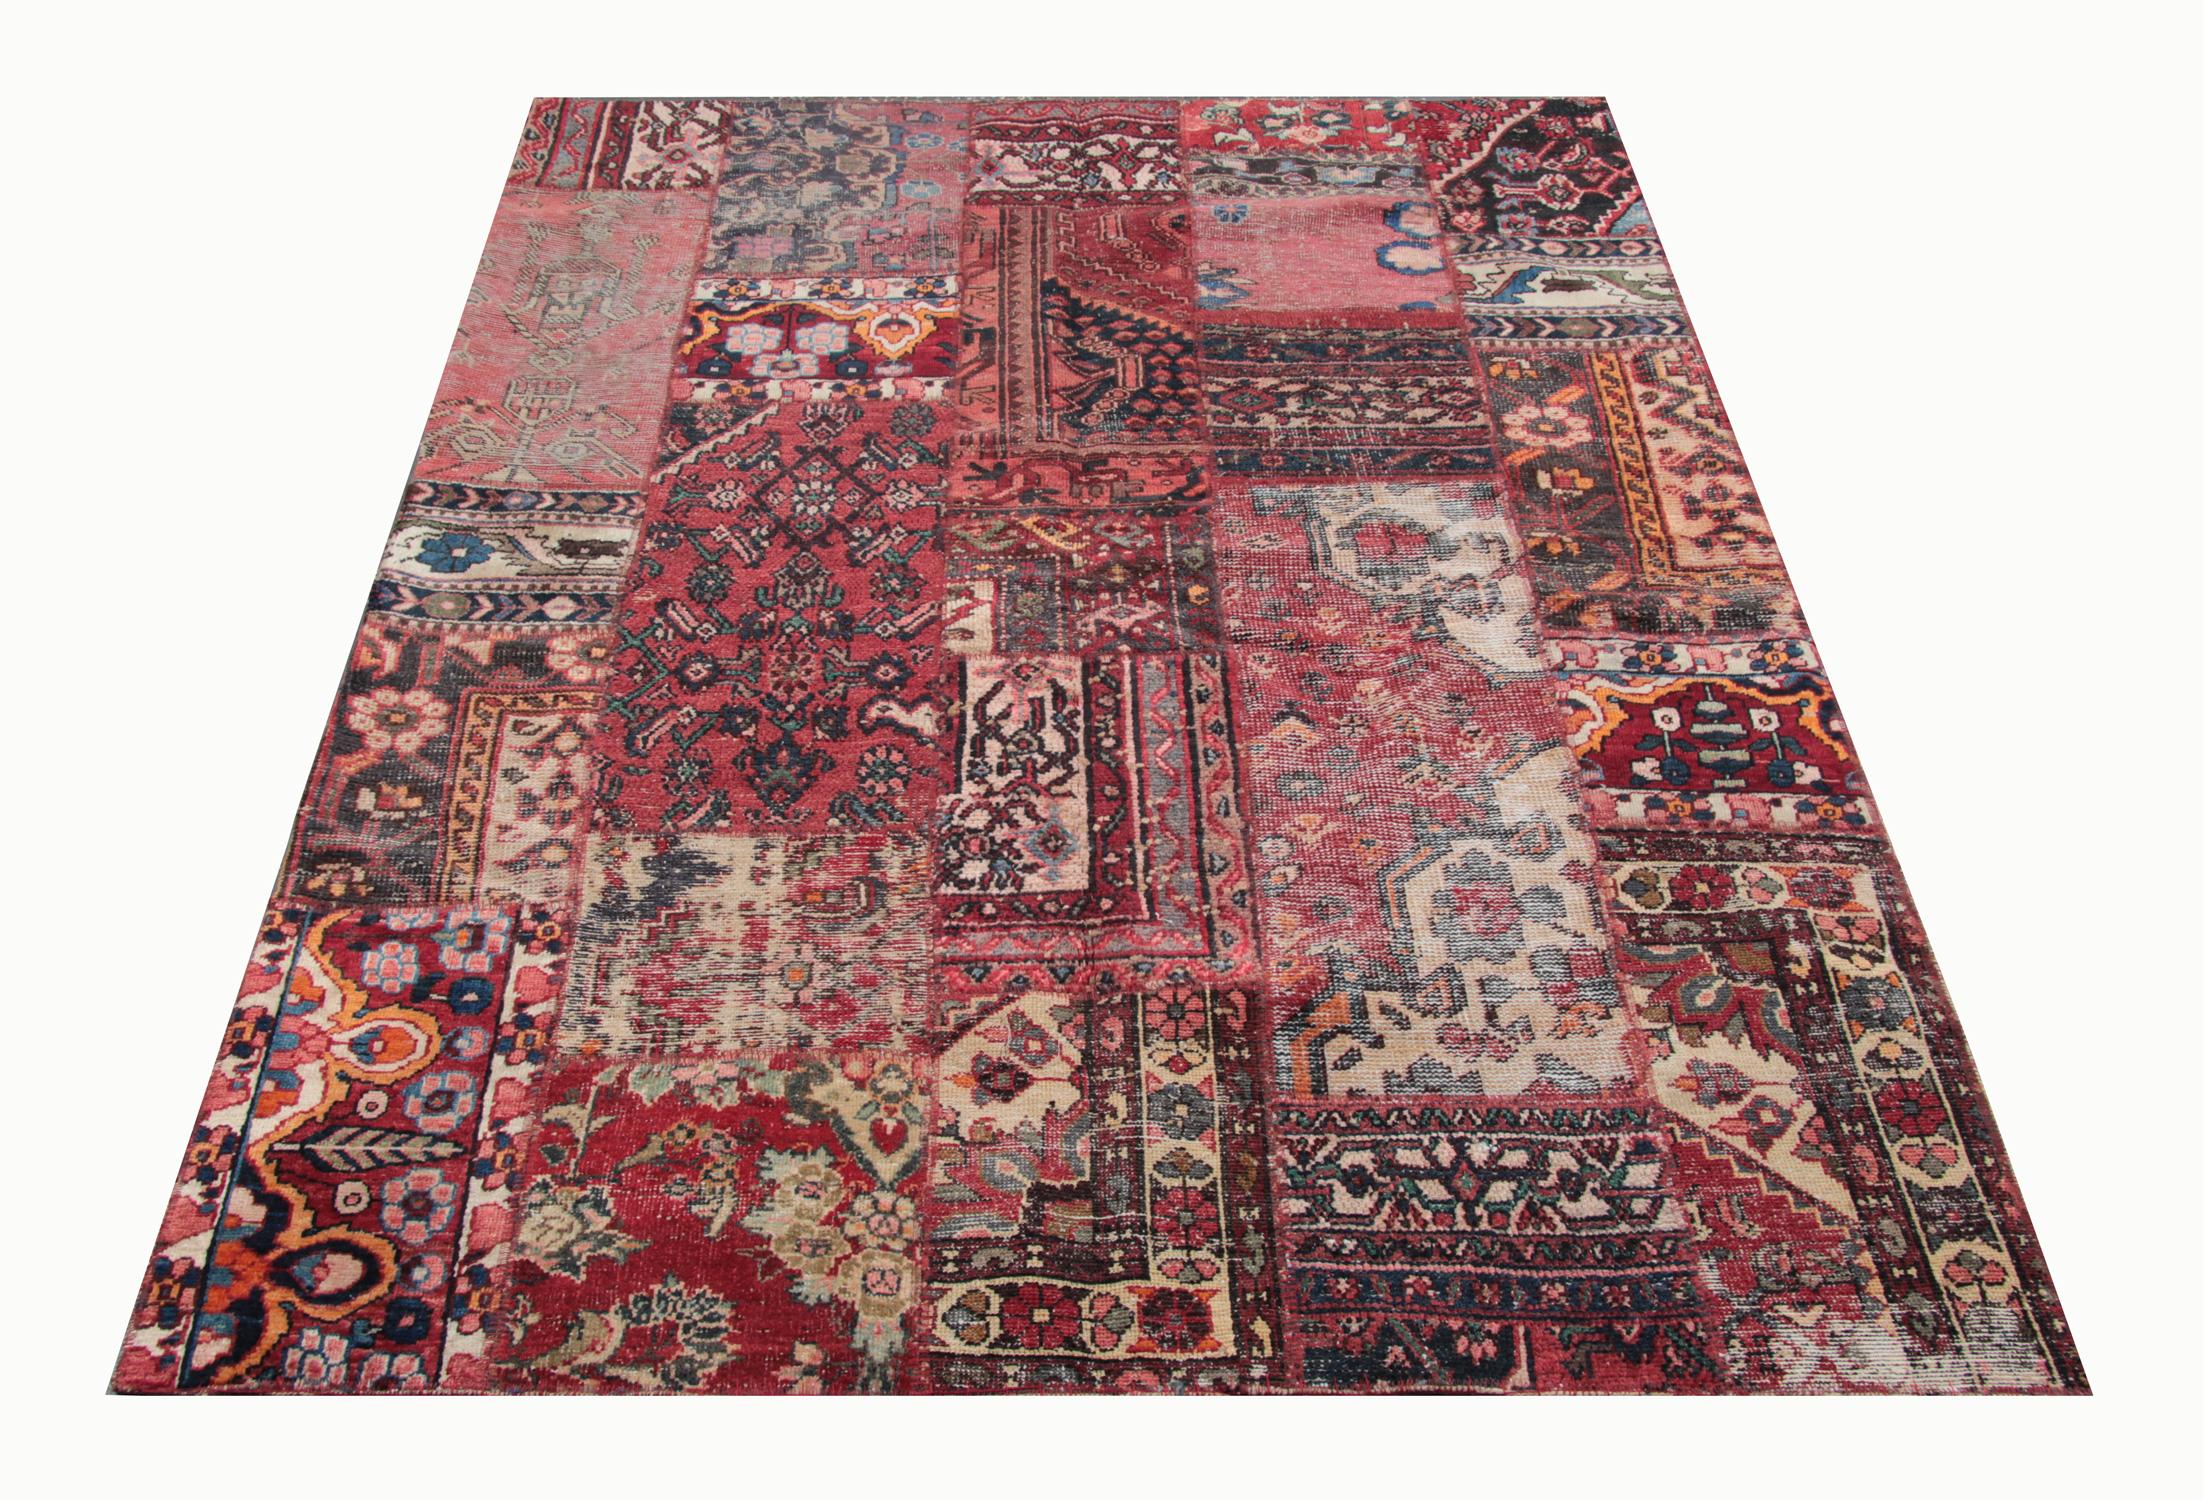 This handmade carpet oriental patterned rug is a combination of various hand-knotted colourful pieces woven together to create a patchwork rug. This luxury rug has been deliberately cut into small parts and then overdyed to create this fantastic